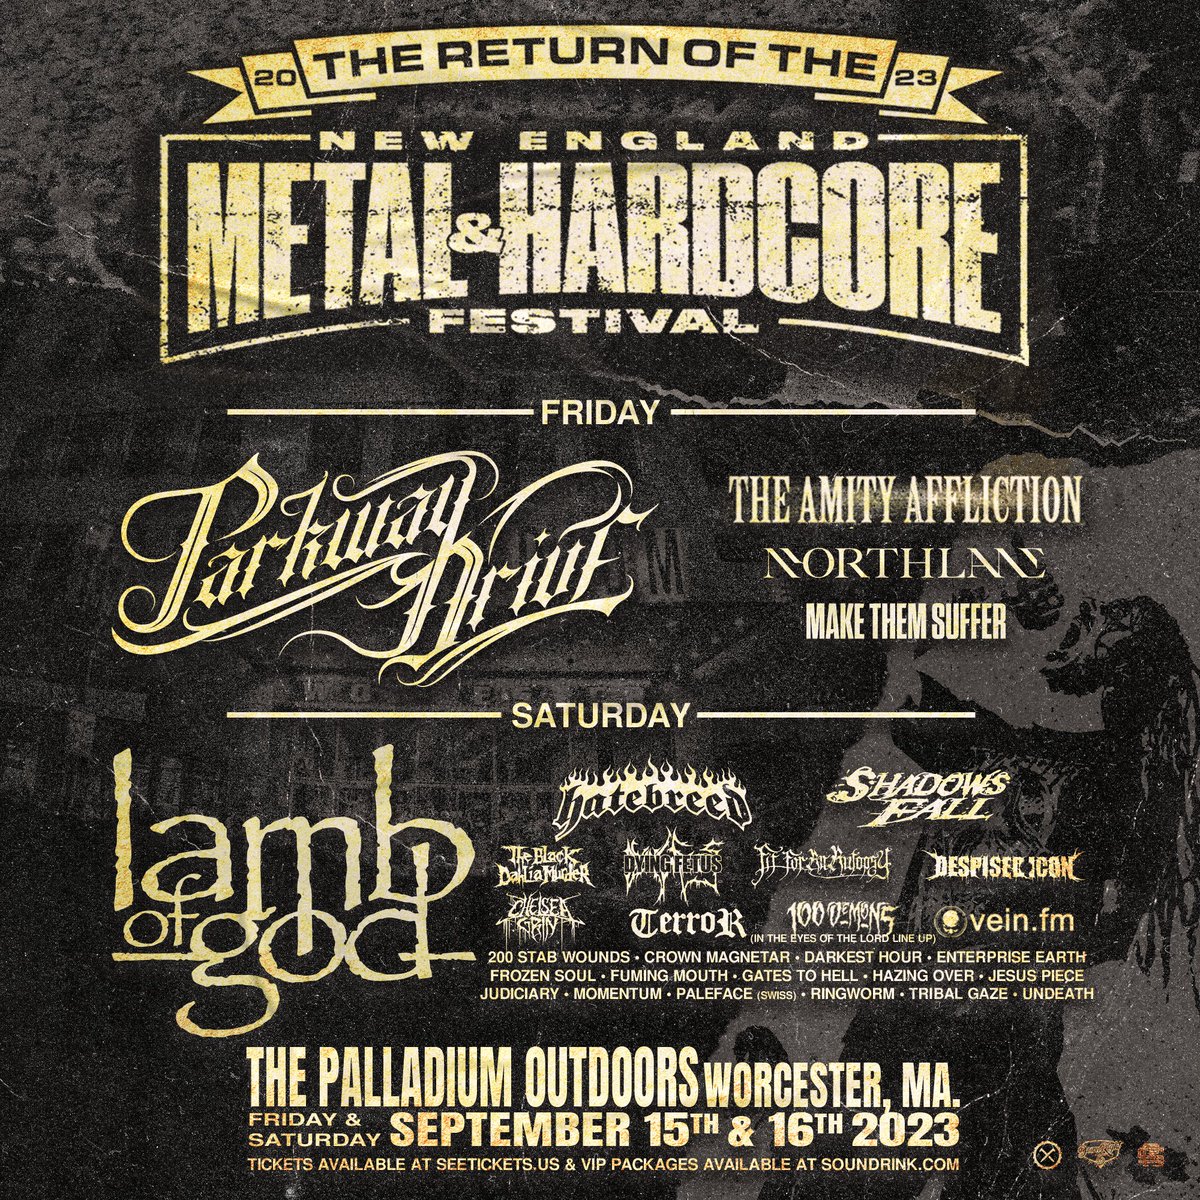 JUST ANNOUNCED: New England Metal and Hardcore Festival will return this fall on 9/15 + 9/16 to @palladium_out!

Featuring: @lambofgod @parkwayofficial & many more!

VIP Packages on sale now via Sound Rink: metalandhardcorefest.com

General On Sale: Friday, 6/16 @ 10AM EST